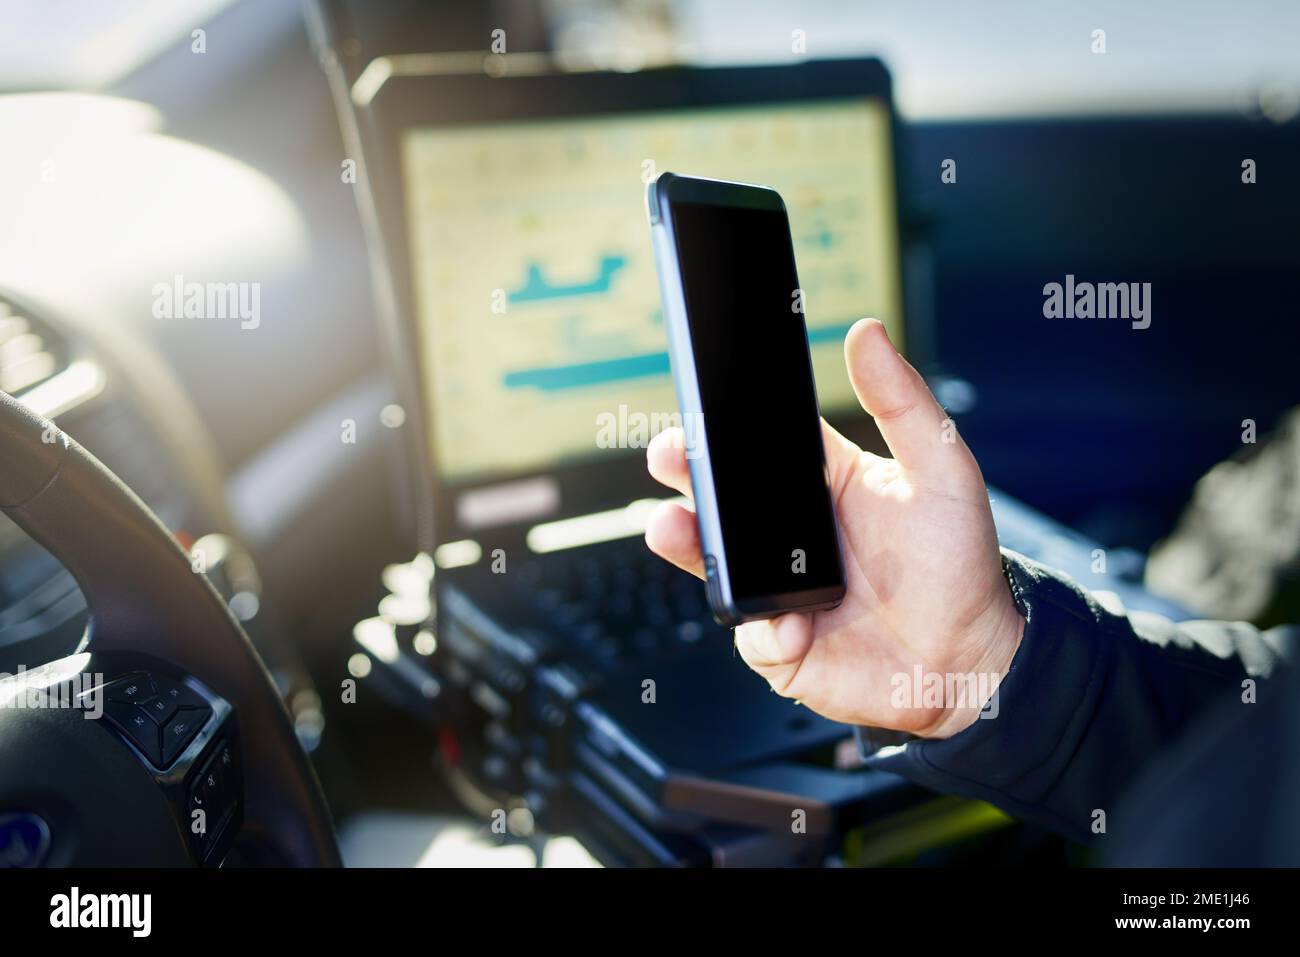 Wireless technology is keeping him up to date. an unrecognizable male police officer using his cellphone while out on patrol. Stock Photo